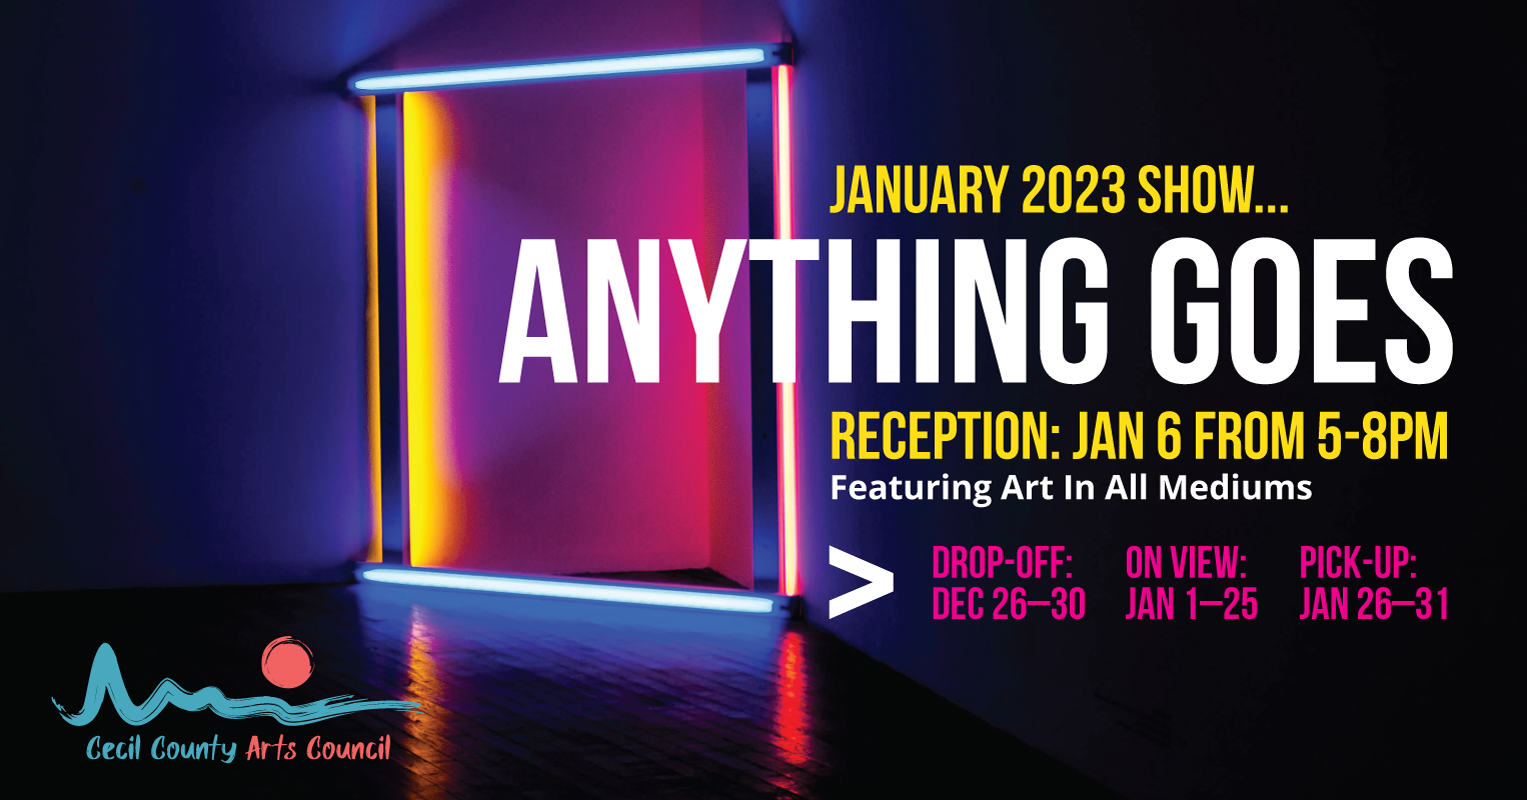 Anything Goes Exhibit - Cecil County Arts Council